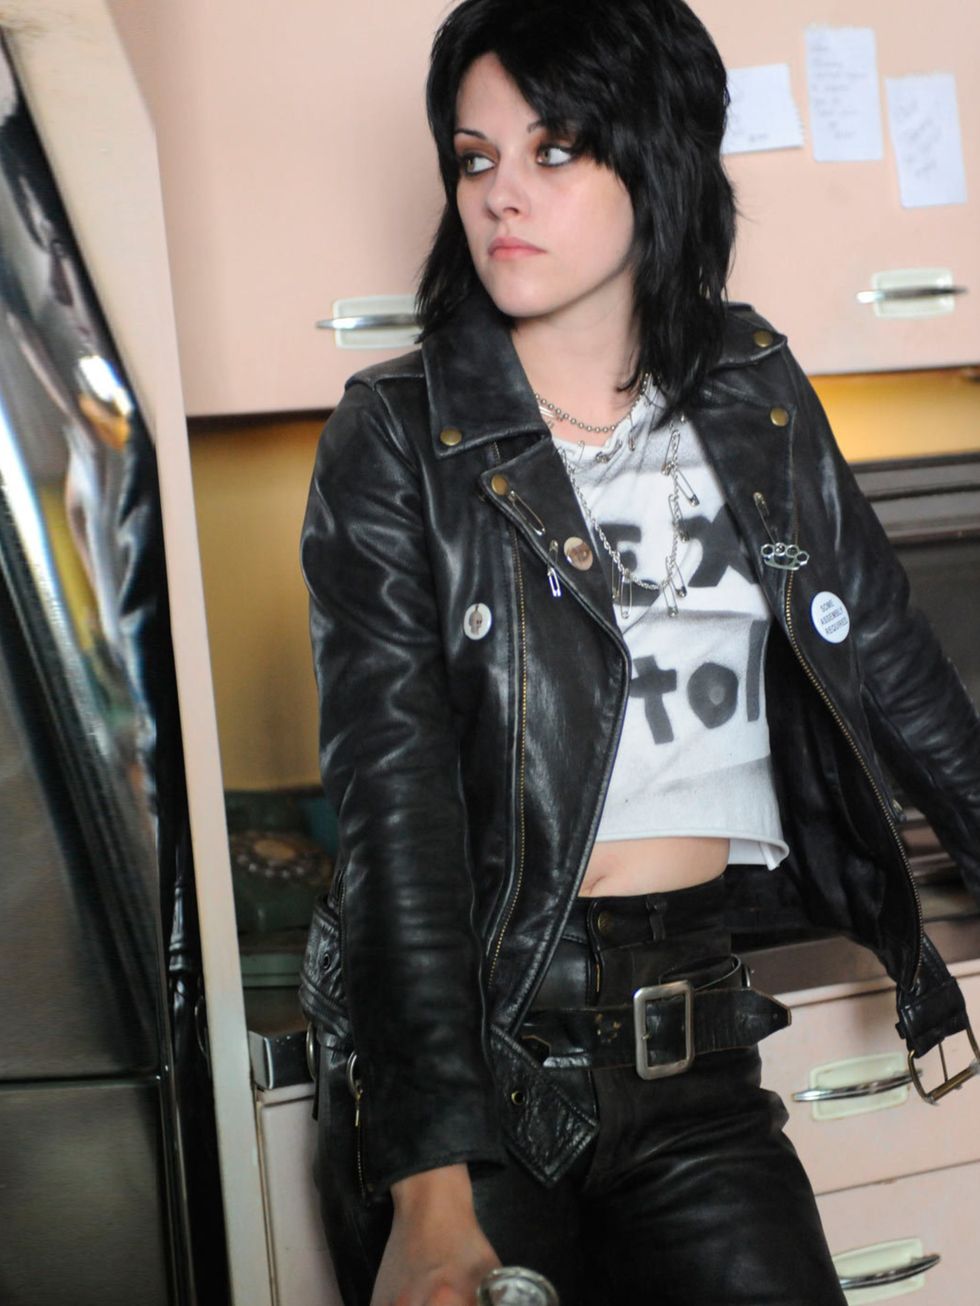 <p><strong><a href="http://www.elleuk.com/star-style/celebrity-style-files/kristen-stewart-s-best-looks">Kristen Stewart</a> as Joan Jett in 'The Runaways'</strong></p><p>Punk through and through, from the leather trousers and shrunken band tees to the st